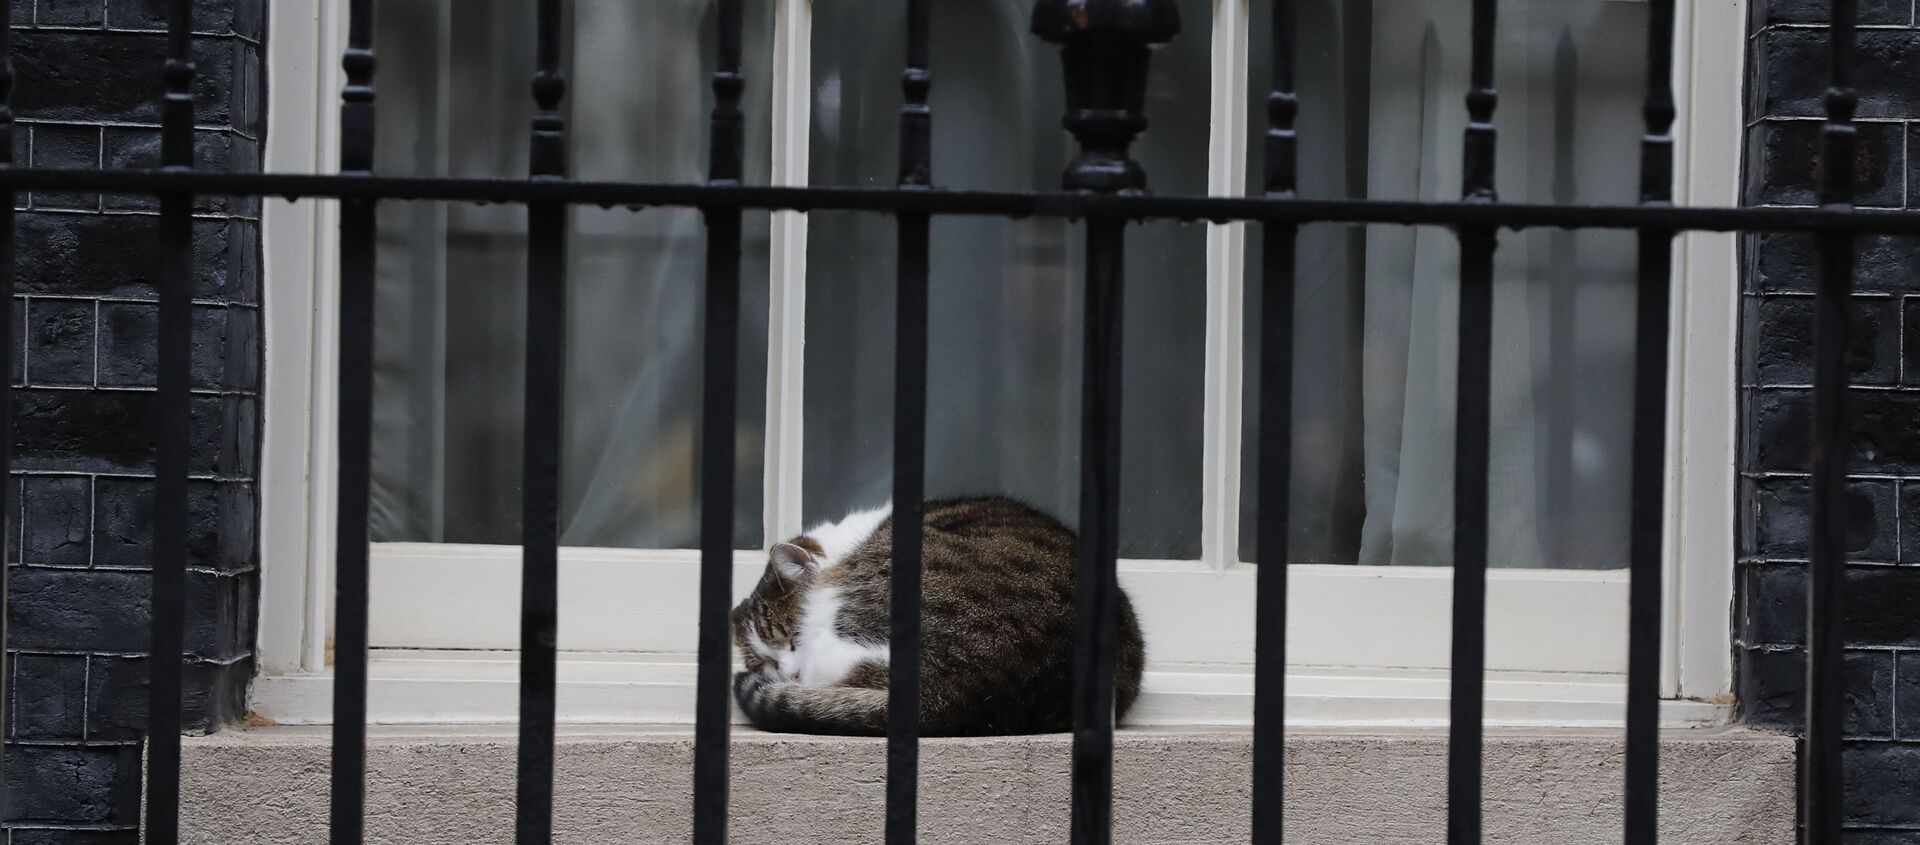 Larry the cat, Britain's Chief Mouser to the Cabinet Office sleeps on a window sill of 10 Downing Street in London, Wednesday, Oct. 21, 2020. - Sputnik International, 1920, 15.02.2021